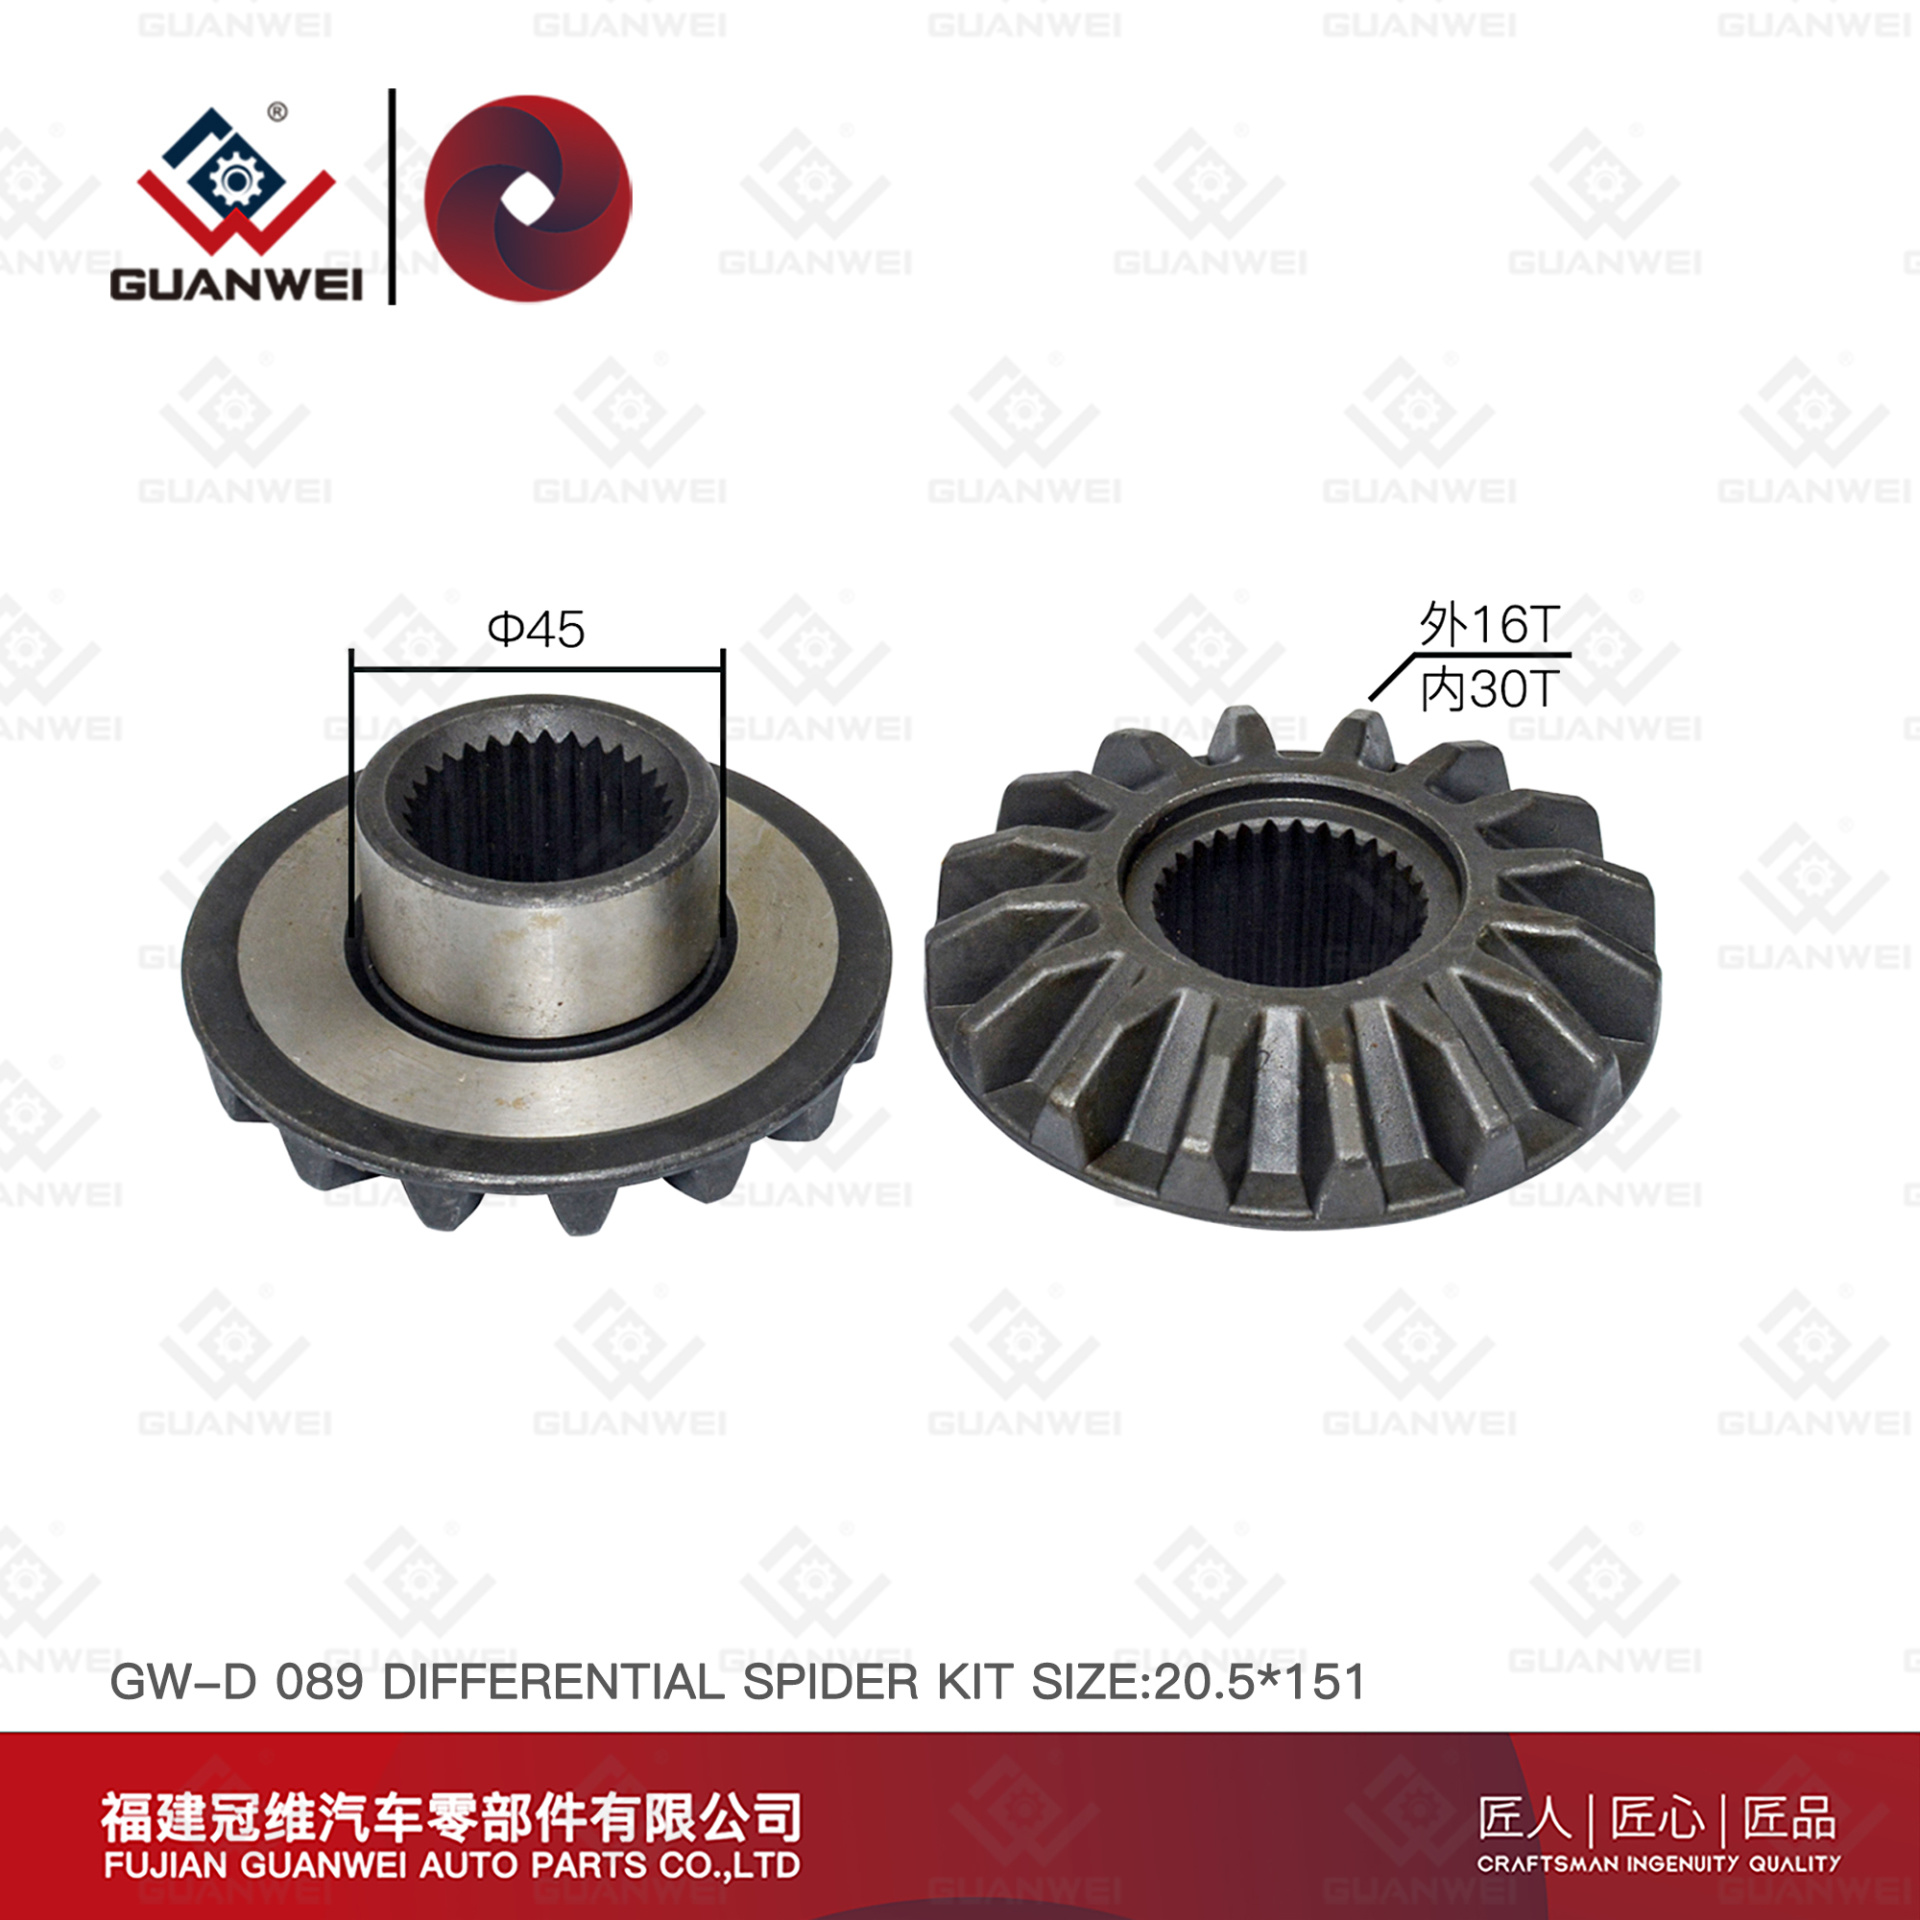 Differential Spider Gear Kit  For TOYOTA 14B